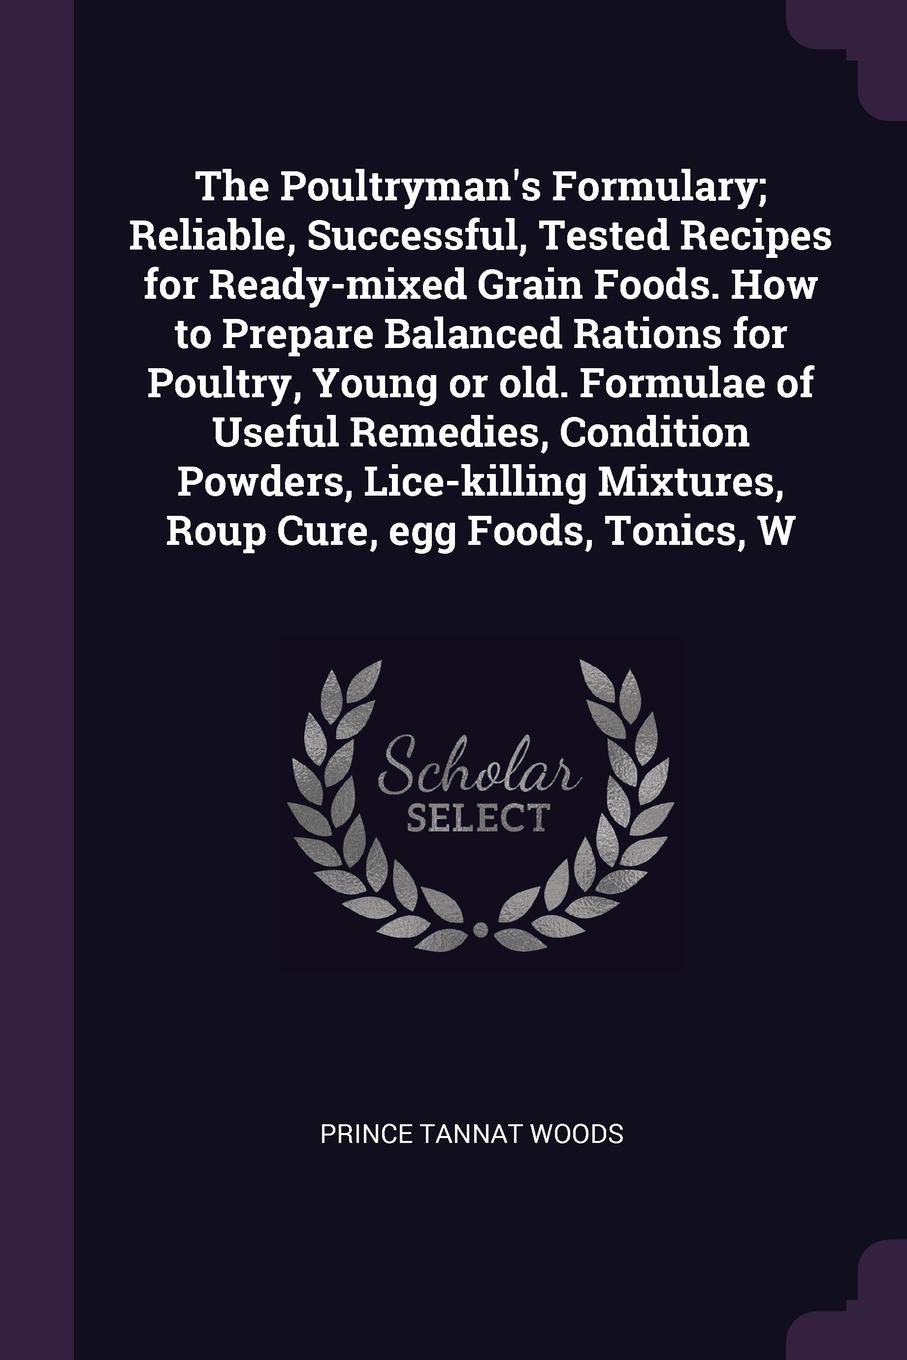 The Poultryman`s Formulary; Reliable, Successful, Tested Recipes for Ready-mixed Grain Foods. How to Prepare Balanced Rations for Poultry, Young or old. Formulae of Useful Remedies, Condition Powders, Lice-killing Mixtures, Roup Cure, egg Foods, T...